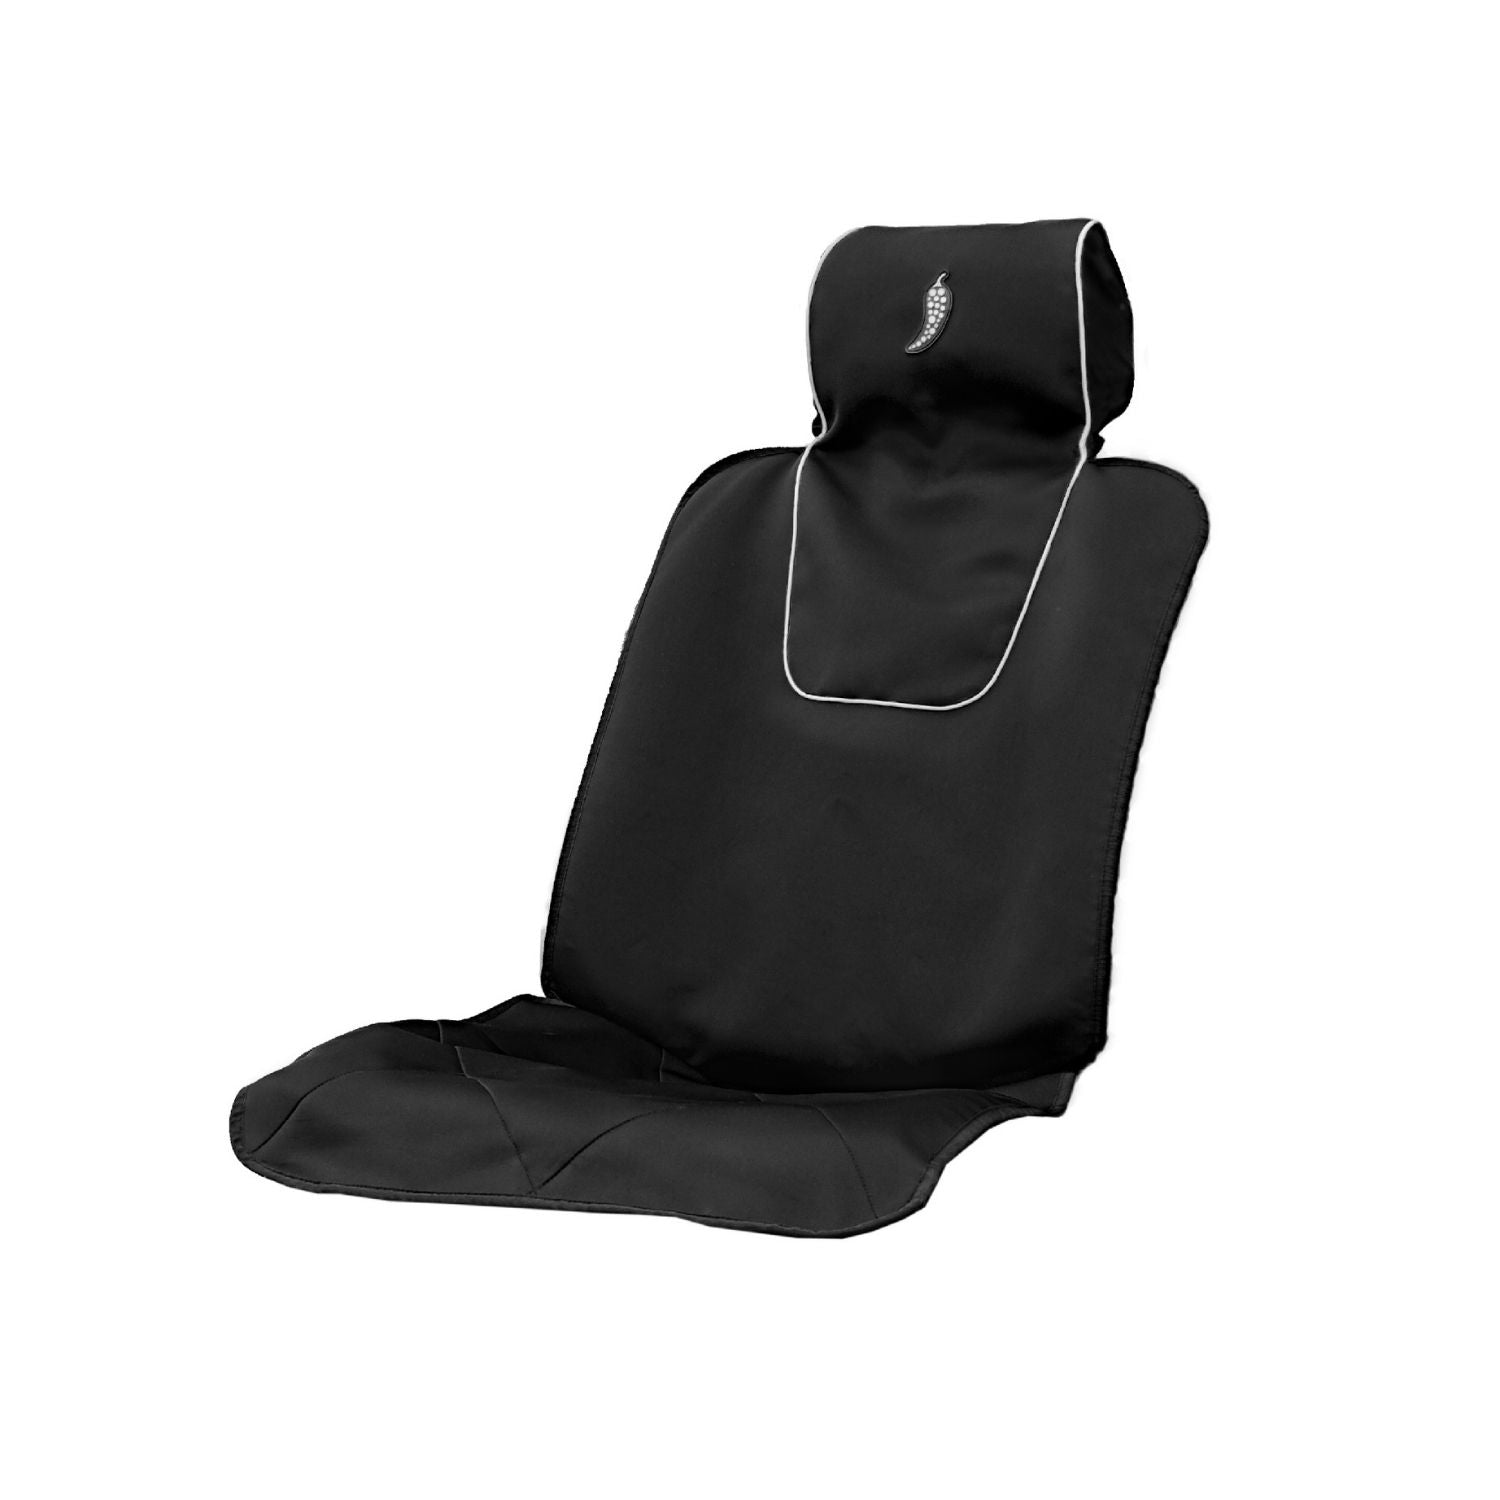 Dry Rub Car Seat Cover for Athletes Universal Fit Machine Washable Sweat Proof Anti-sweat Running Triathlon Gym Swimming and at MechanicSurplus.com